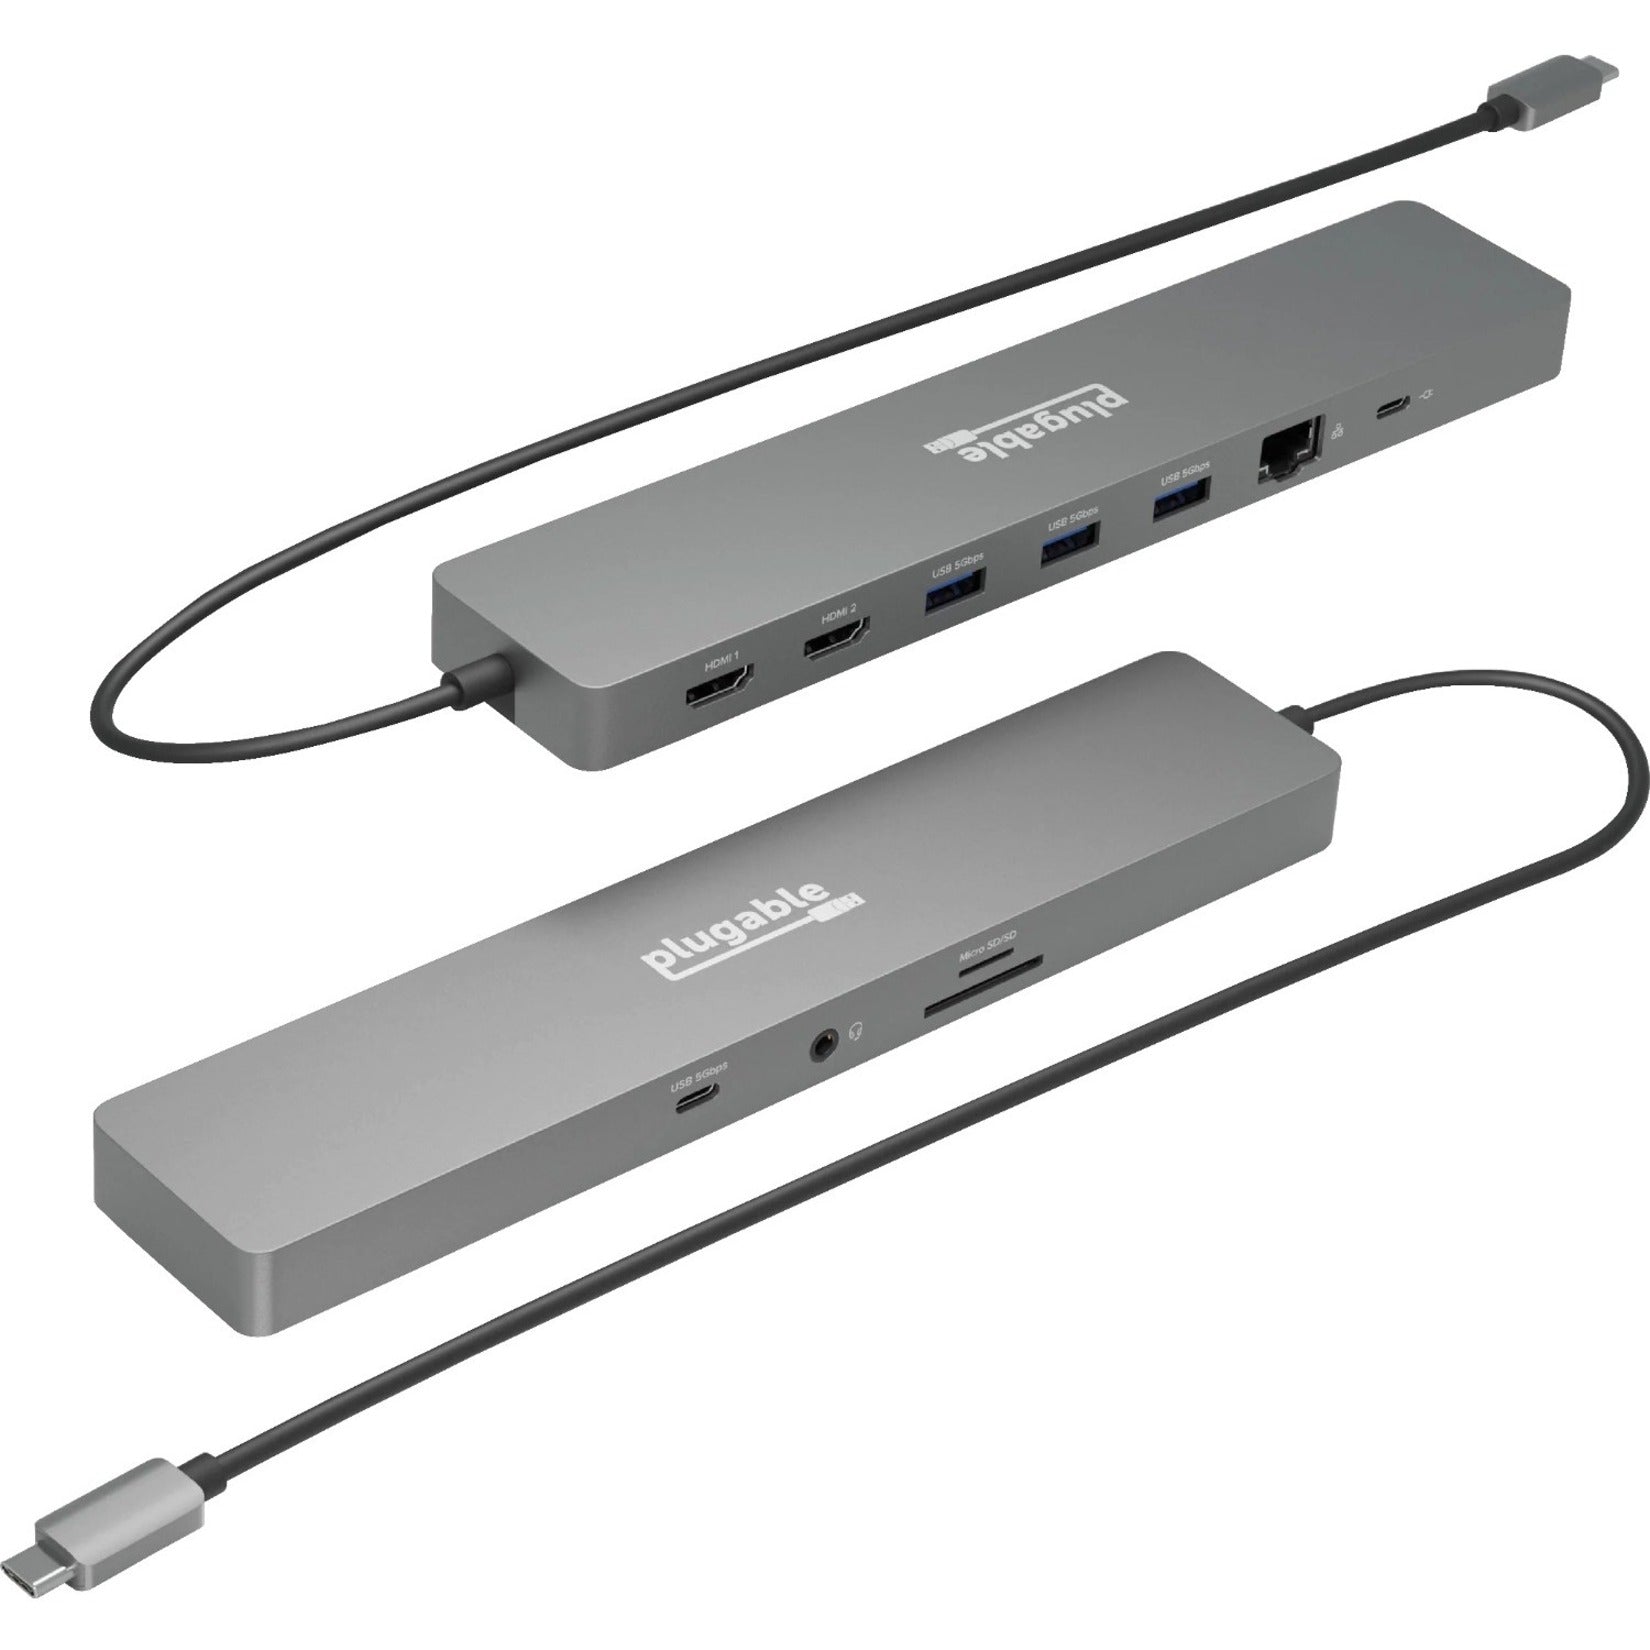 Plugable USBC-11IN1E USB-C 11-IN-1 Hub With Ethernet 100W USB-C Pass-through Dual Monitor Docking Station 4K HDMI